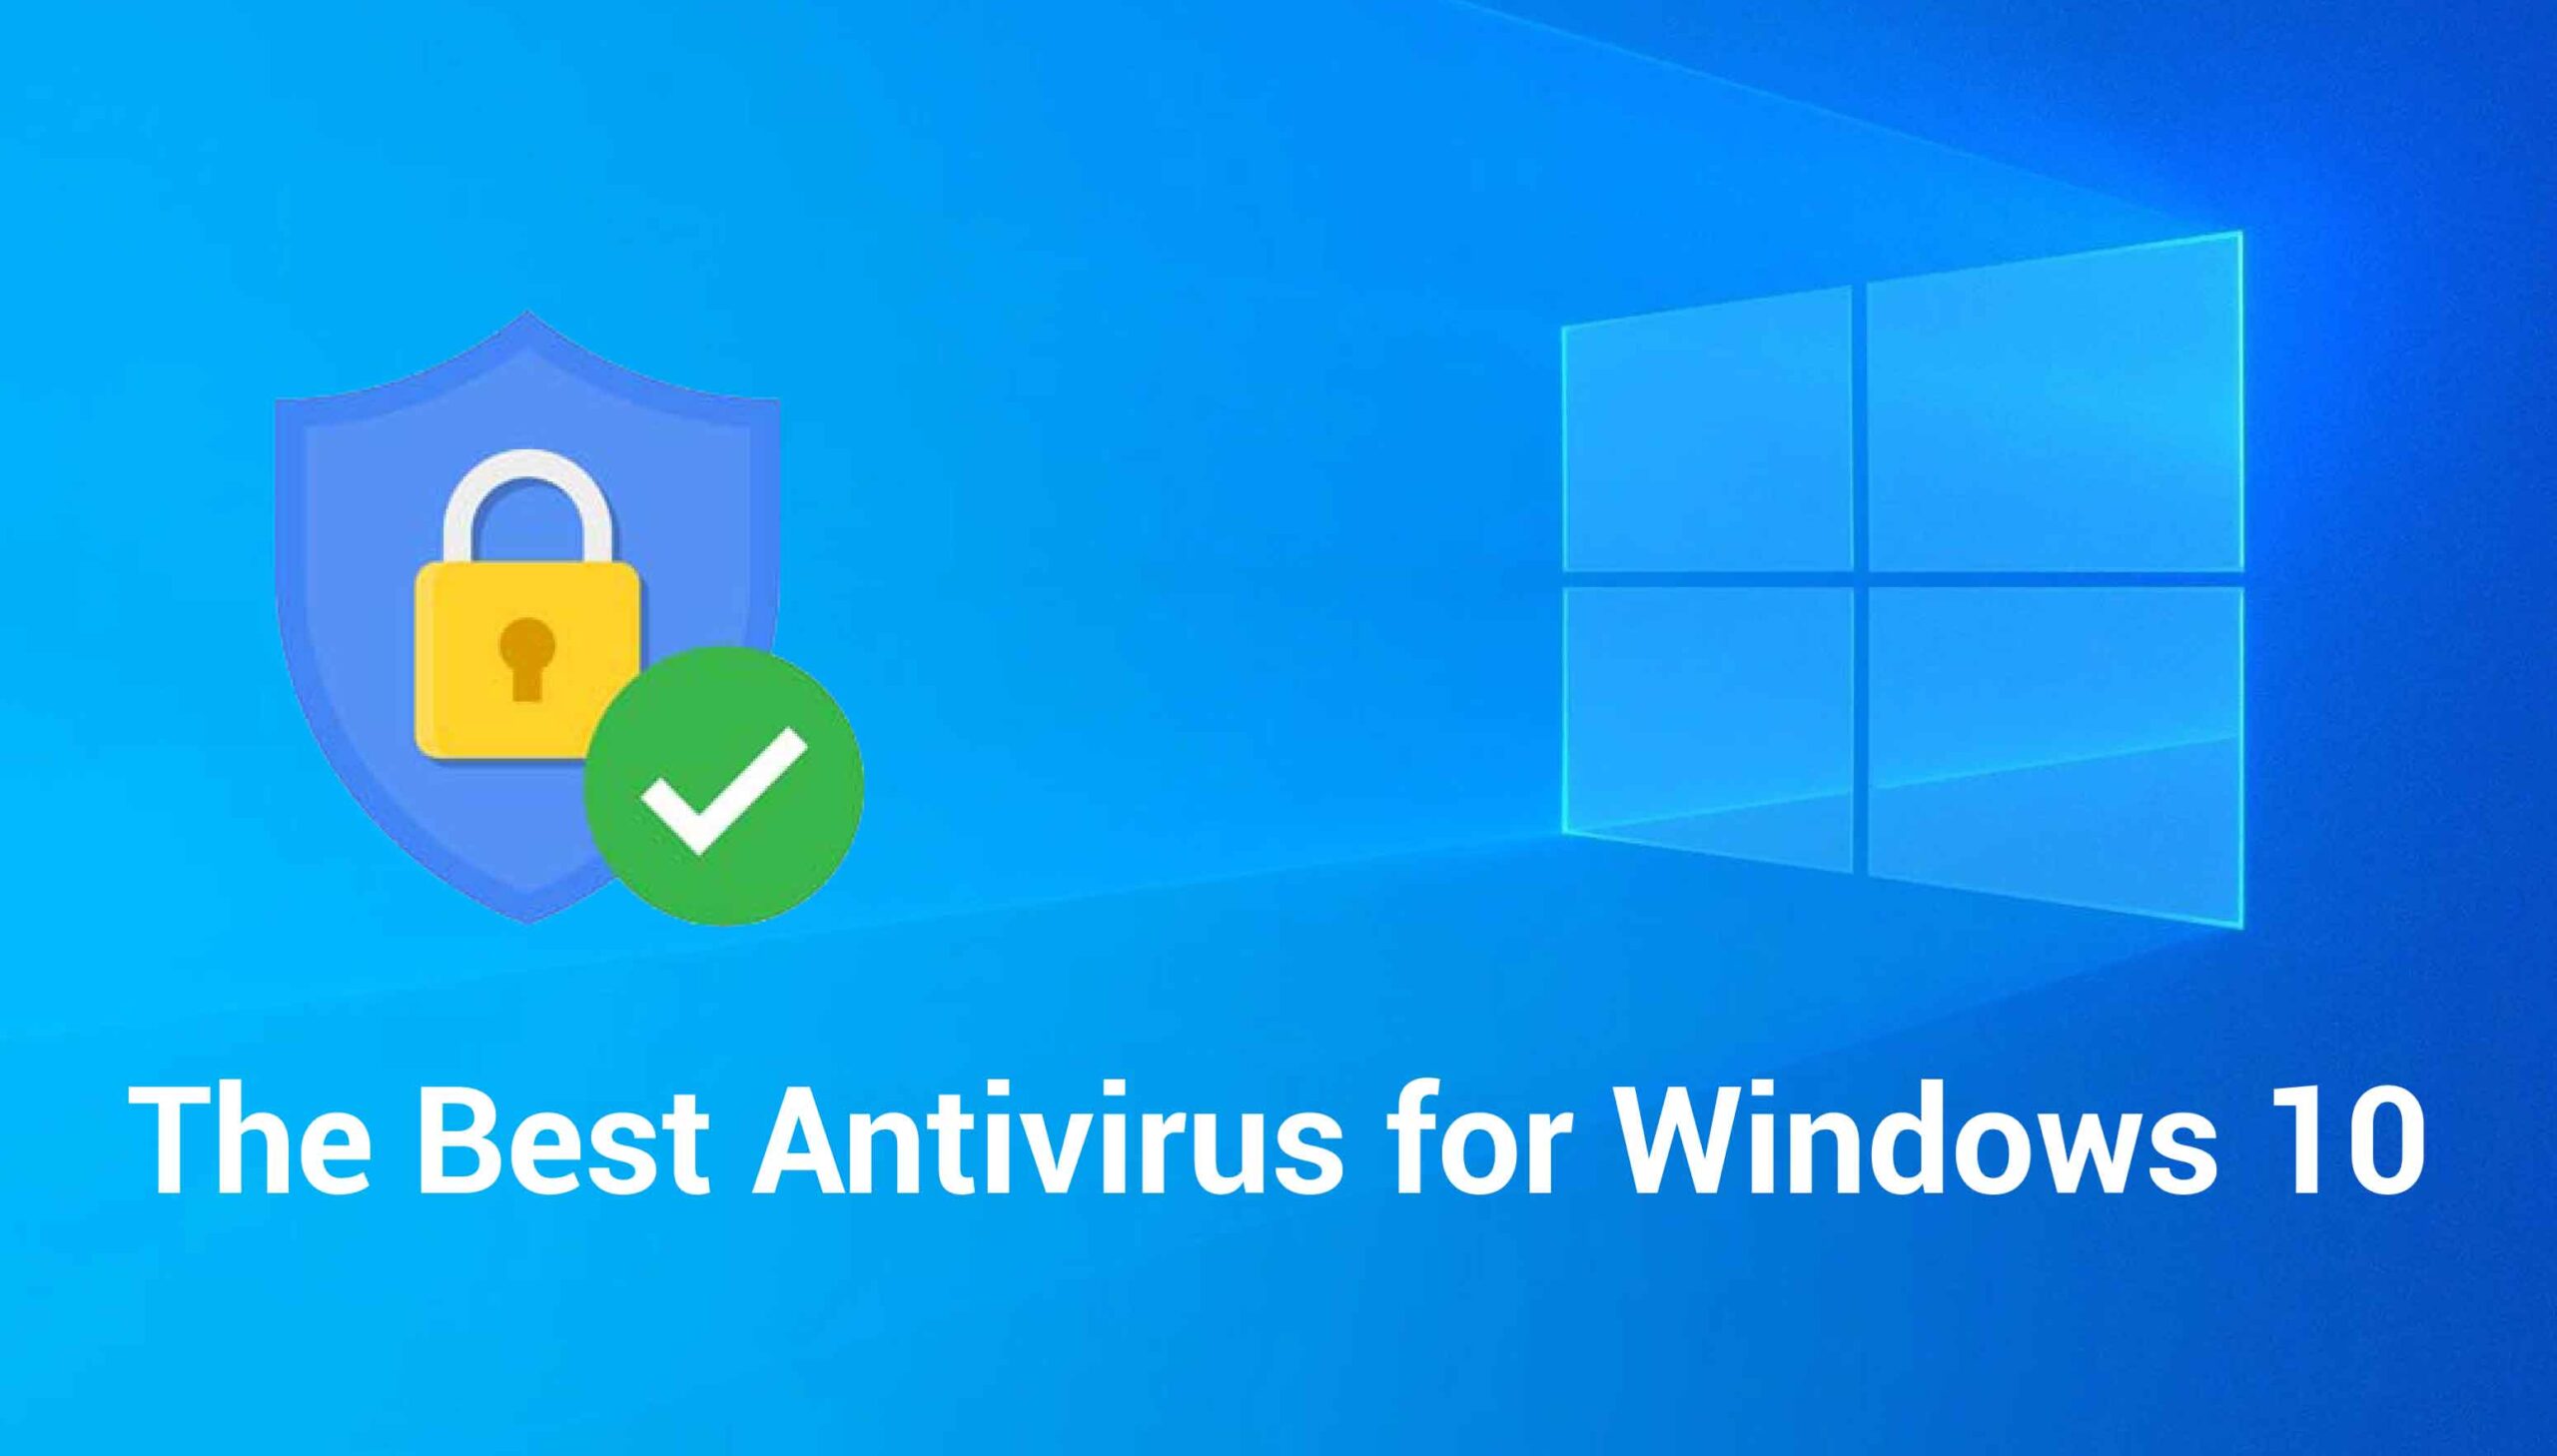 Graphic showcasing "the best antivirus for Windows 10" with a shield icon and a check mark against a blue background, symbolizing antivirus security.